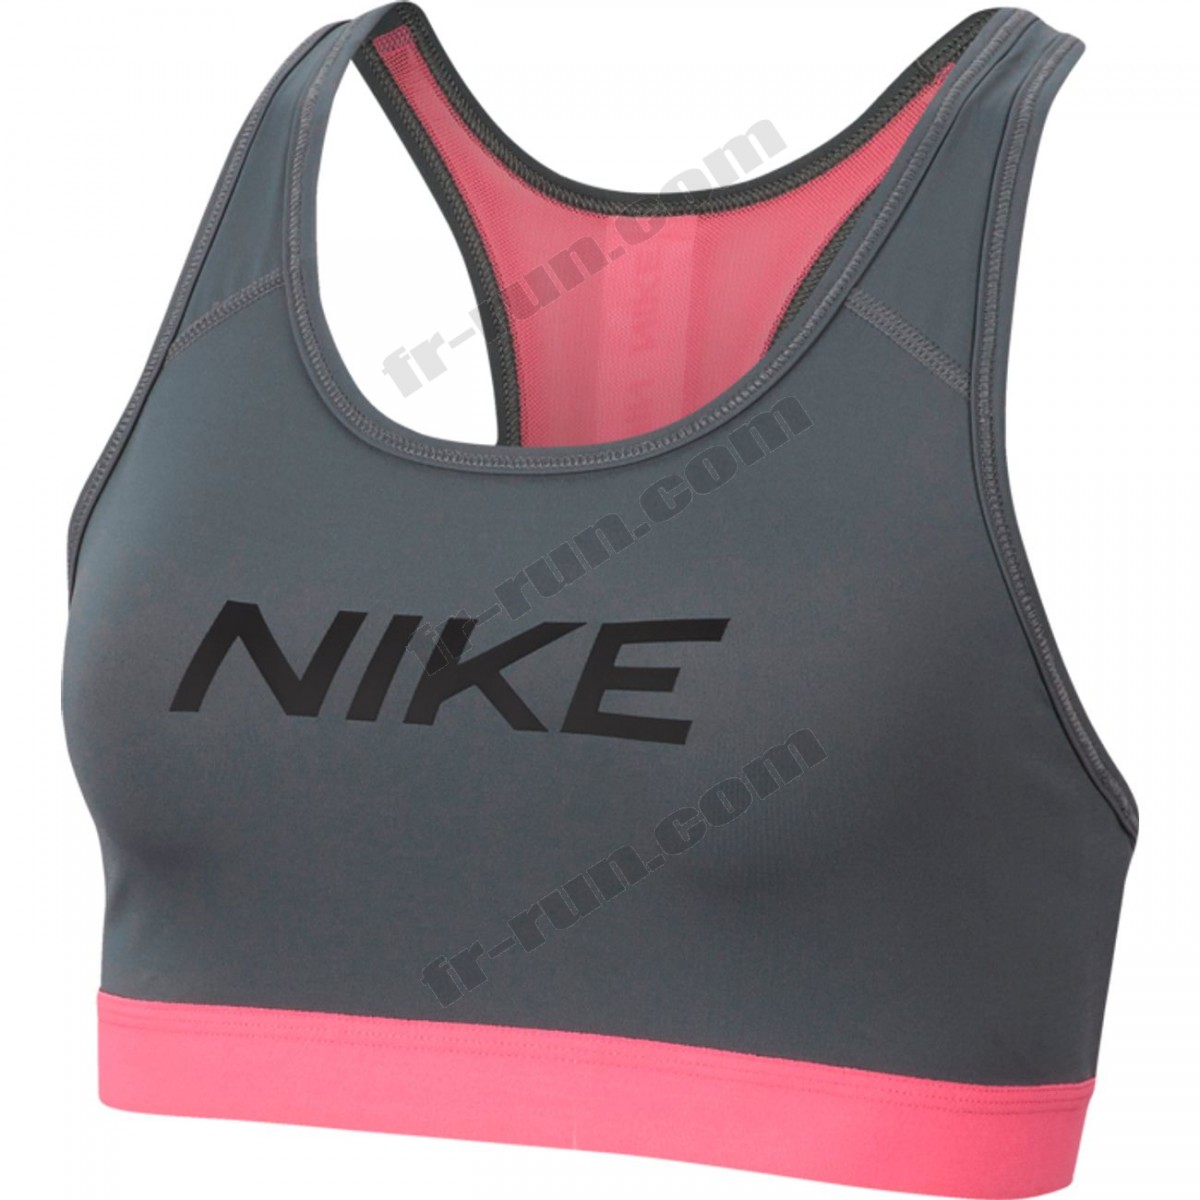 Nike/BRASSIERE Fitness femme NIKE MED BAND HBRGX NO PAD ◇◇◇ Pas Cher Du Tout - Nike/BRASSIERE Fitness femme NIKE MED BAND HBRGX NO PAD ◇◇◇ Pas Cher Du Tout